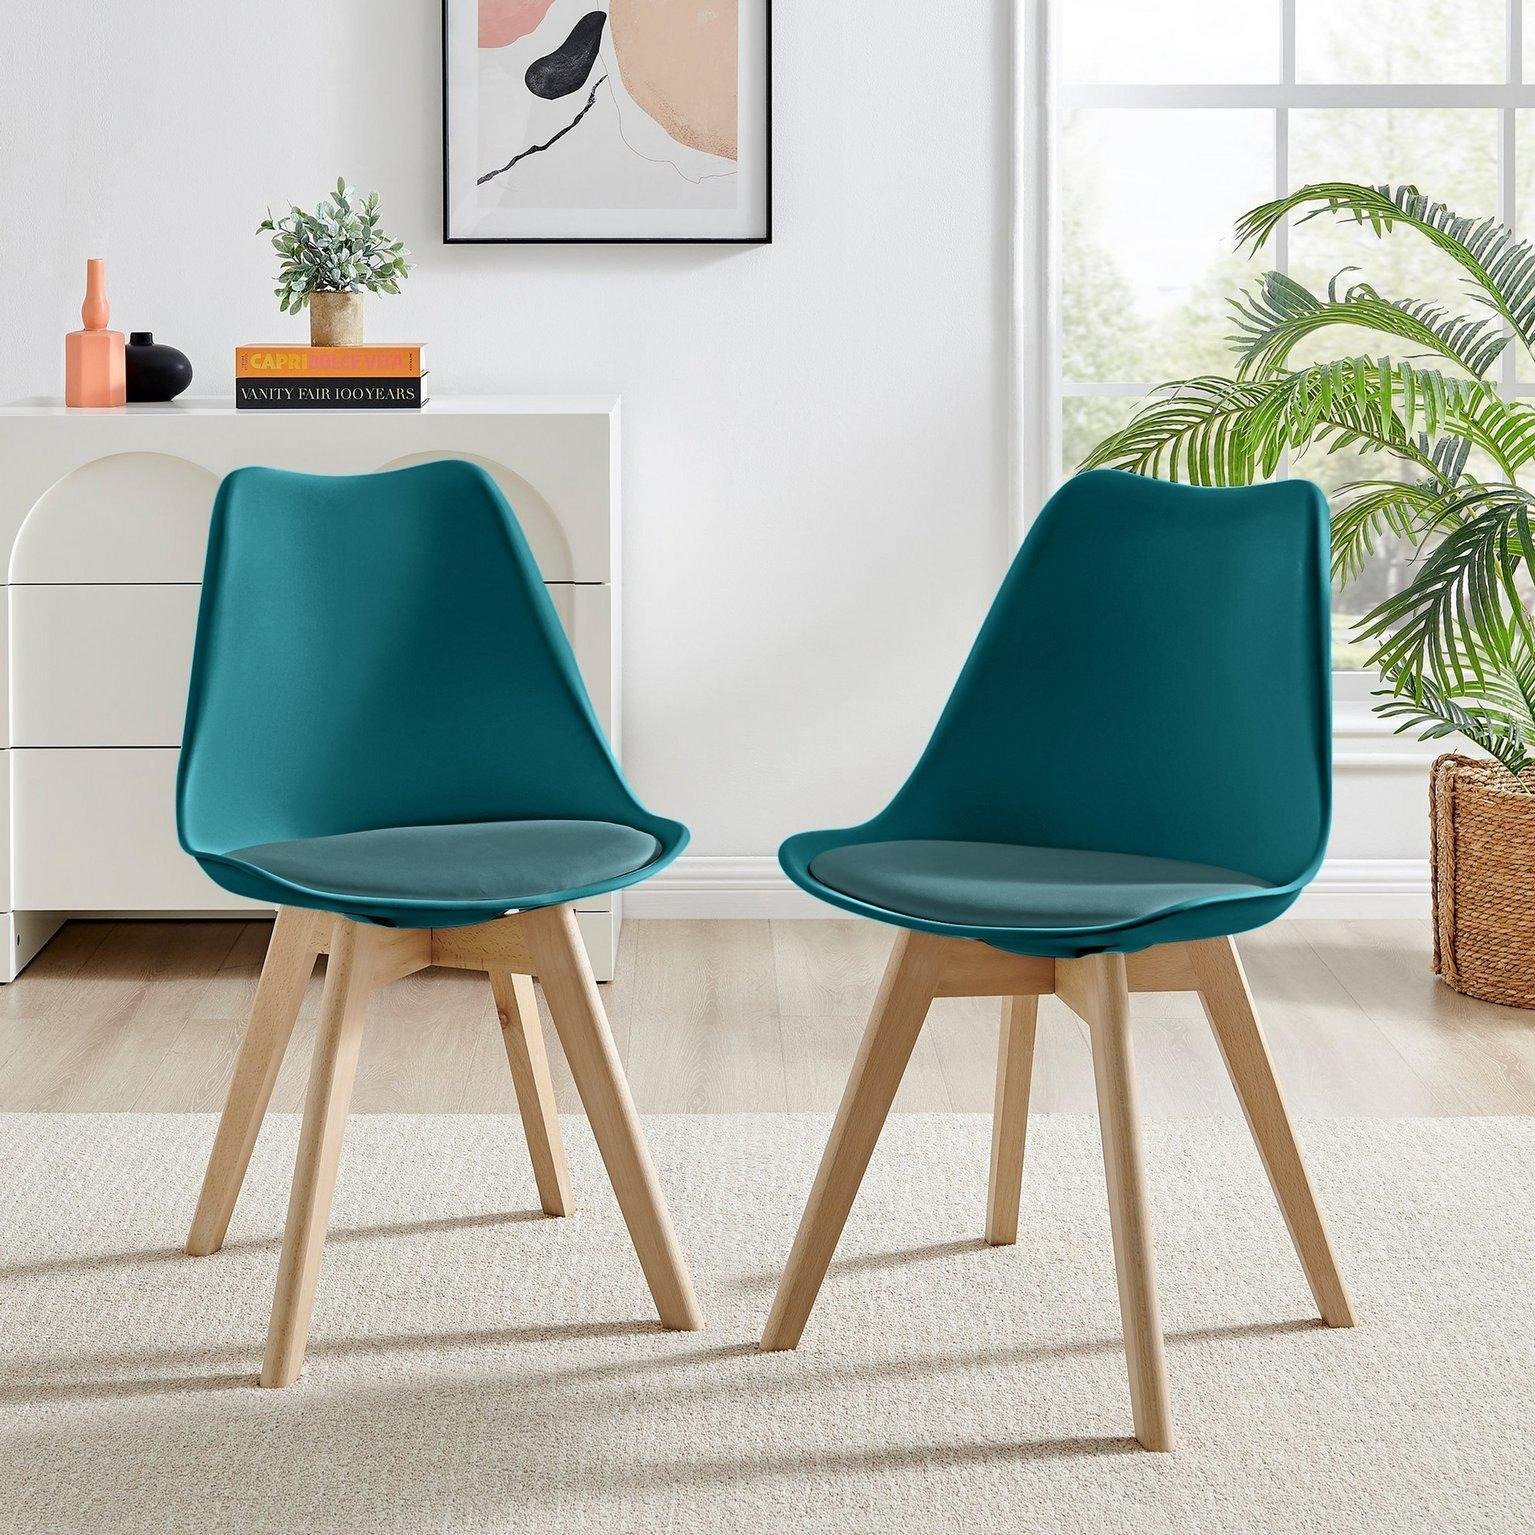 Set of 2 Stockholm Natural Birch Wood Scandi Minimalist Dining Chairs with Faux Leather Cushion - image 1